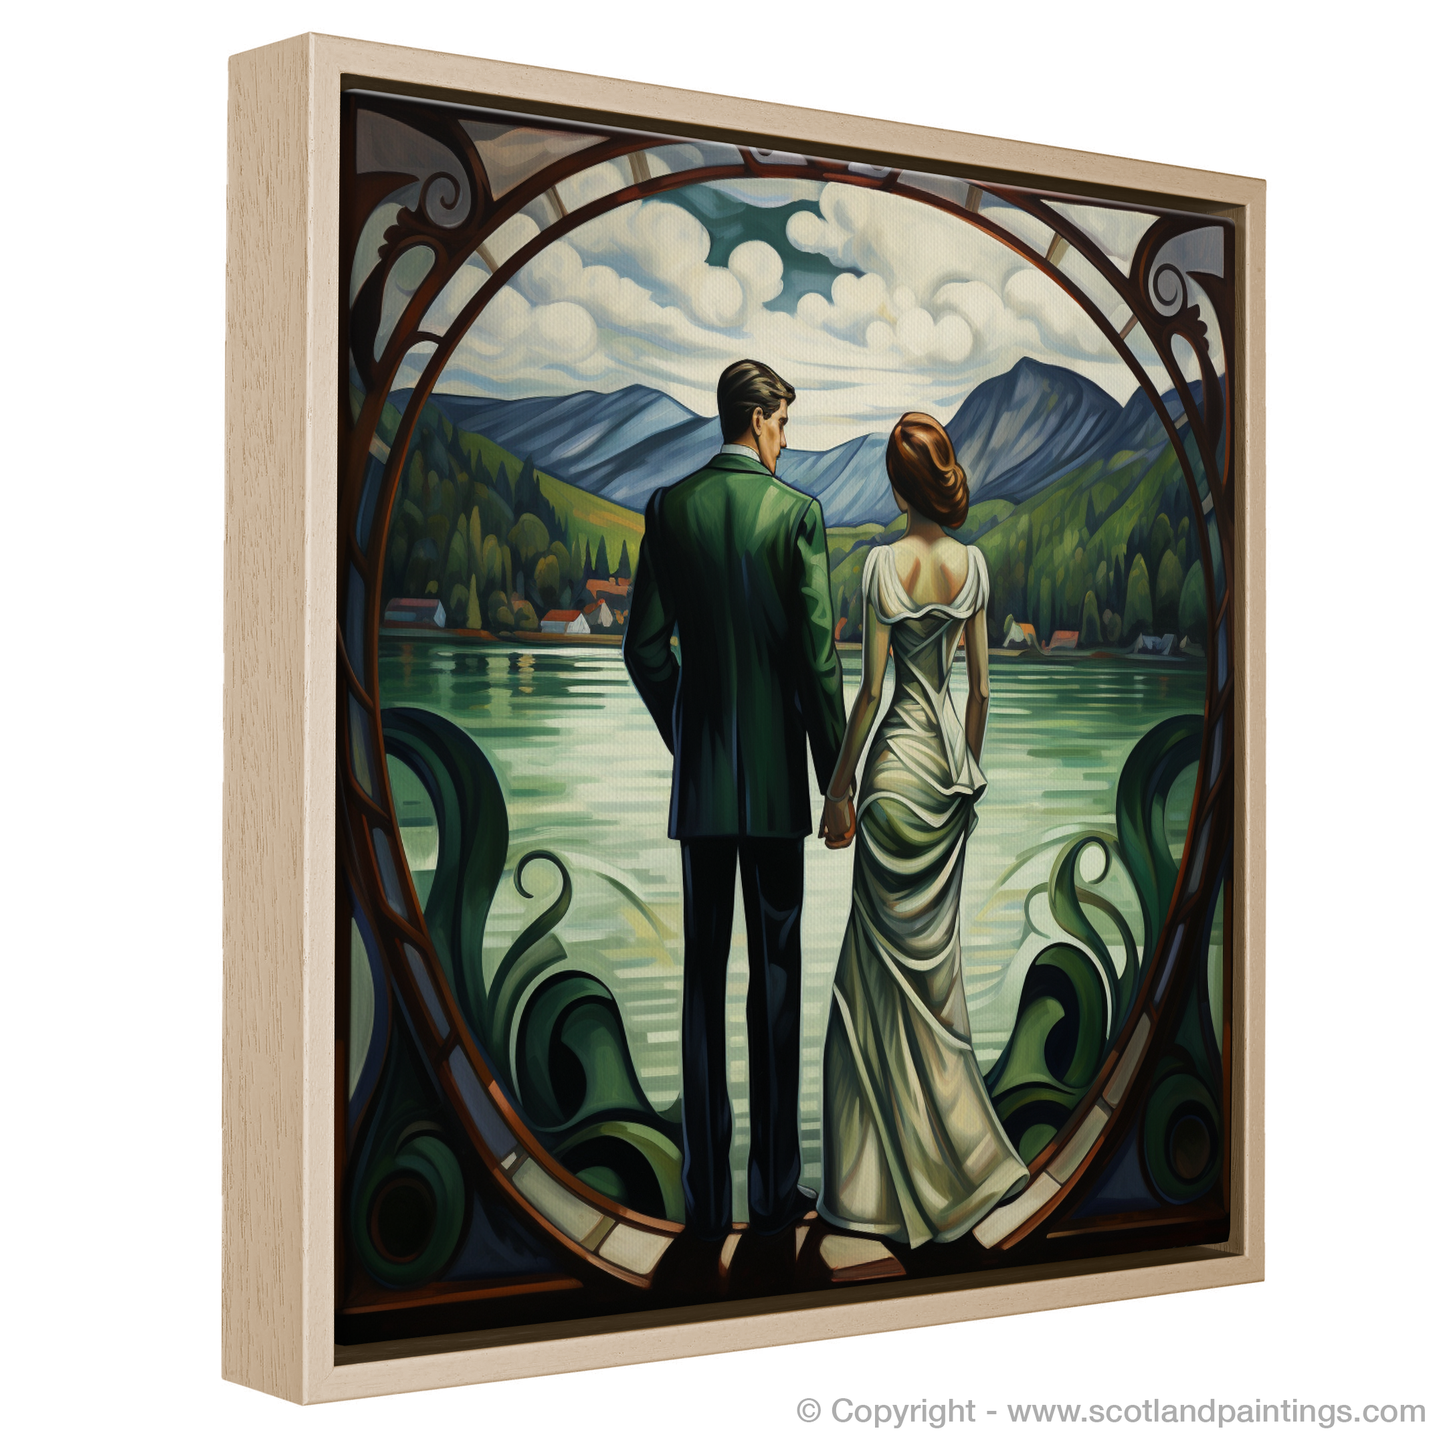 Painting and Art Print of A couple holding hands looking out on Loch Lomond entitled "Hand in Hand at Loch Lomond: An Art Nouveau Tribute".